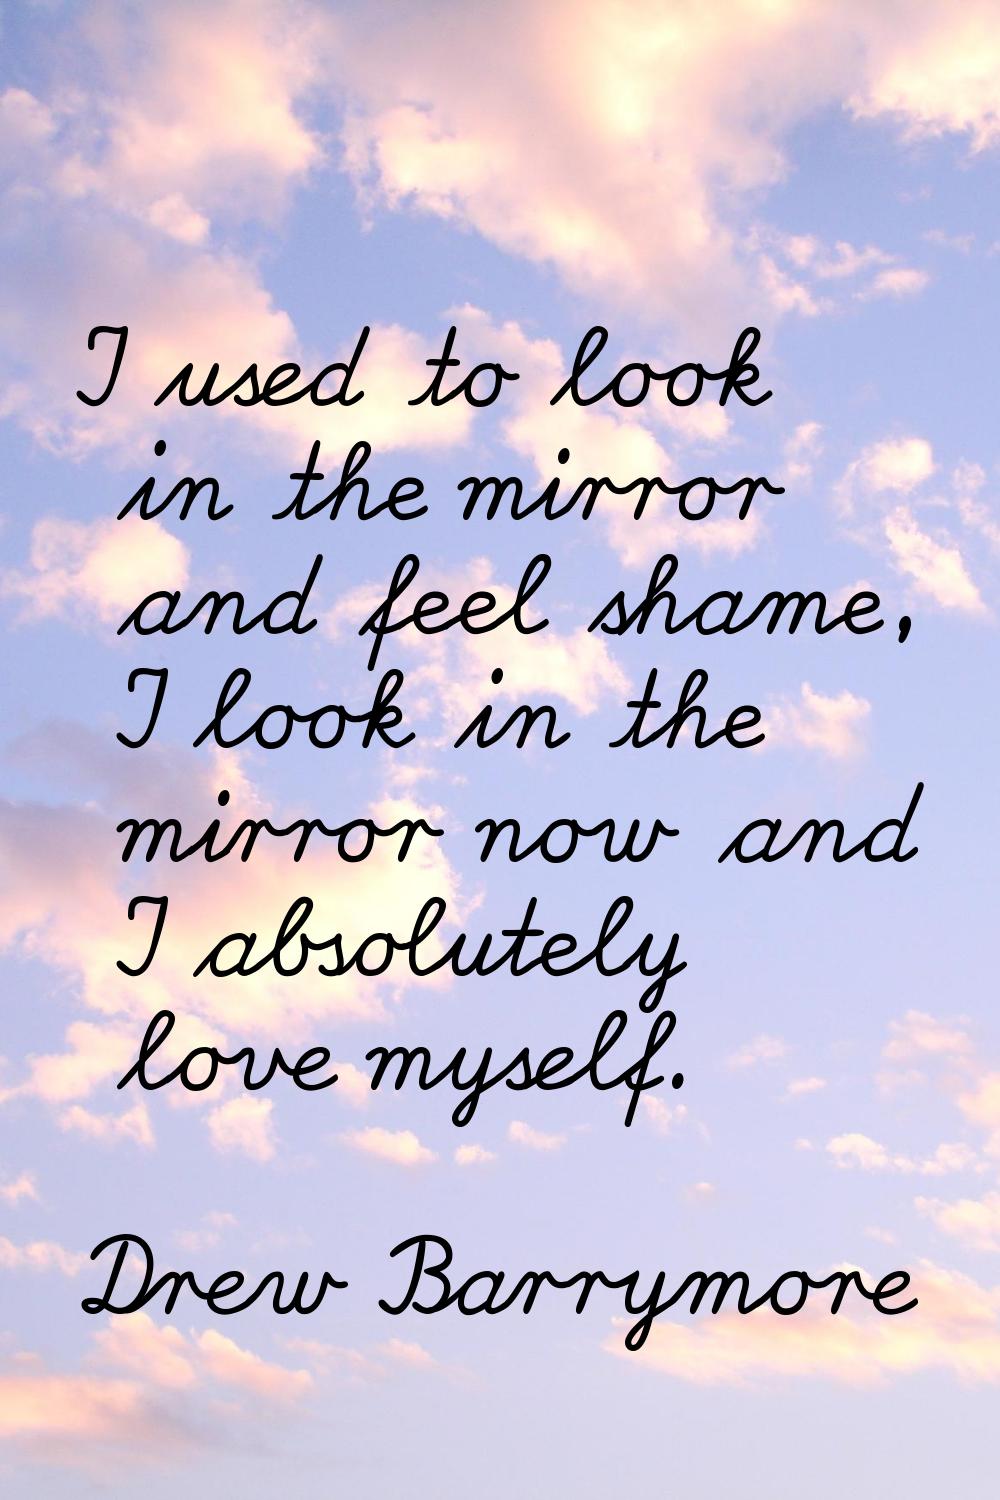 I used to look in the mirror and feel shame, I look in the mirror now and I absolutely love myself.